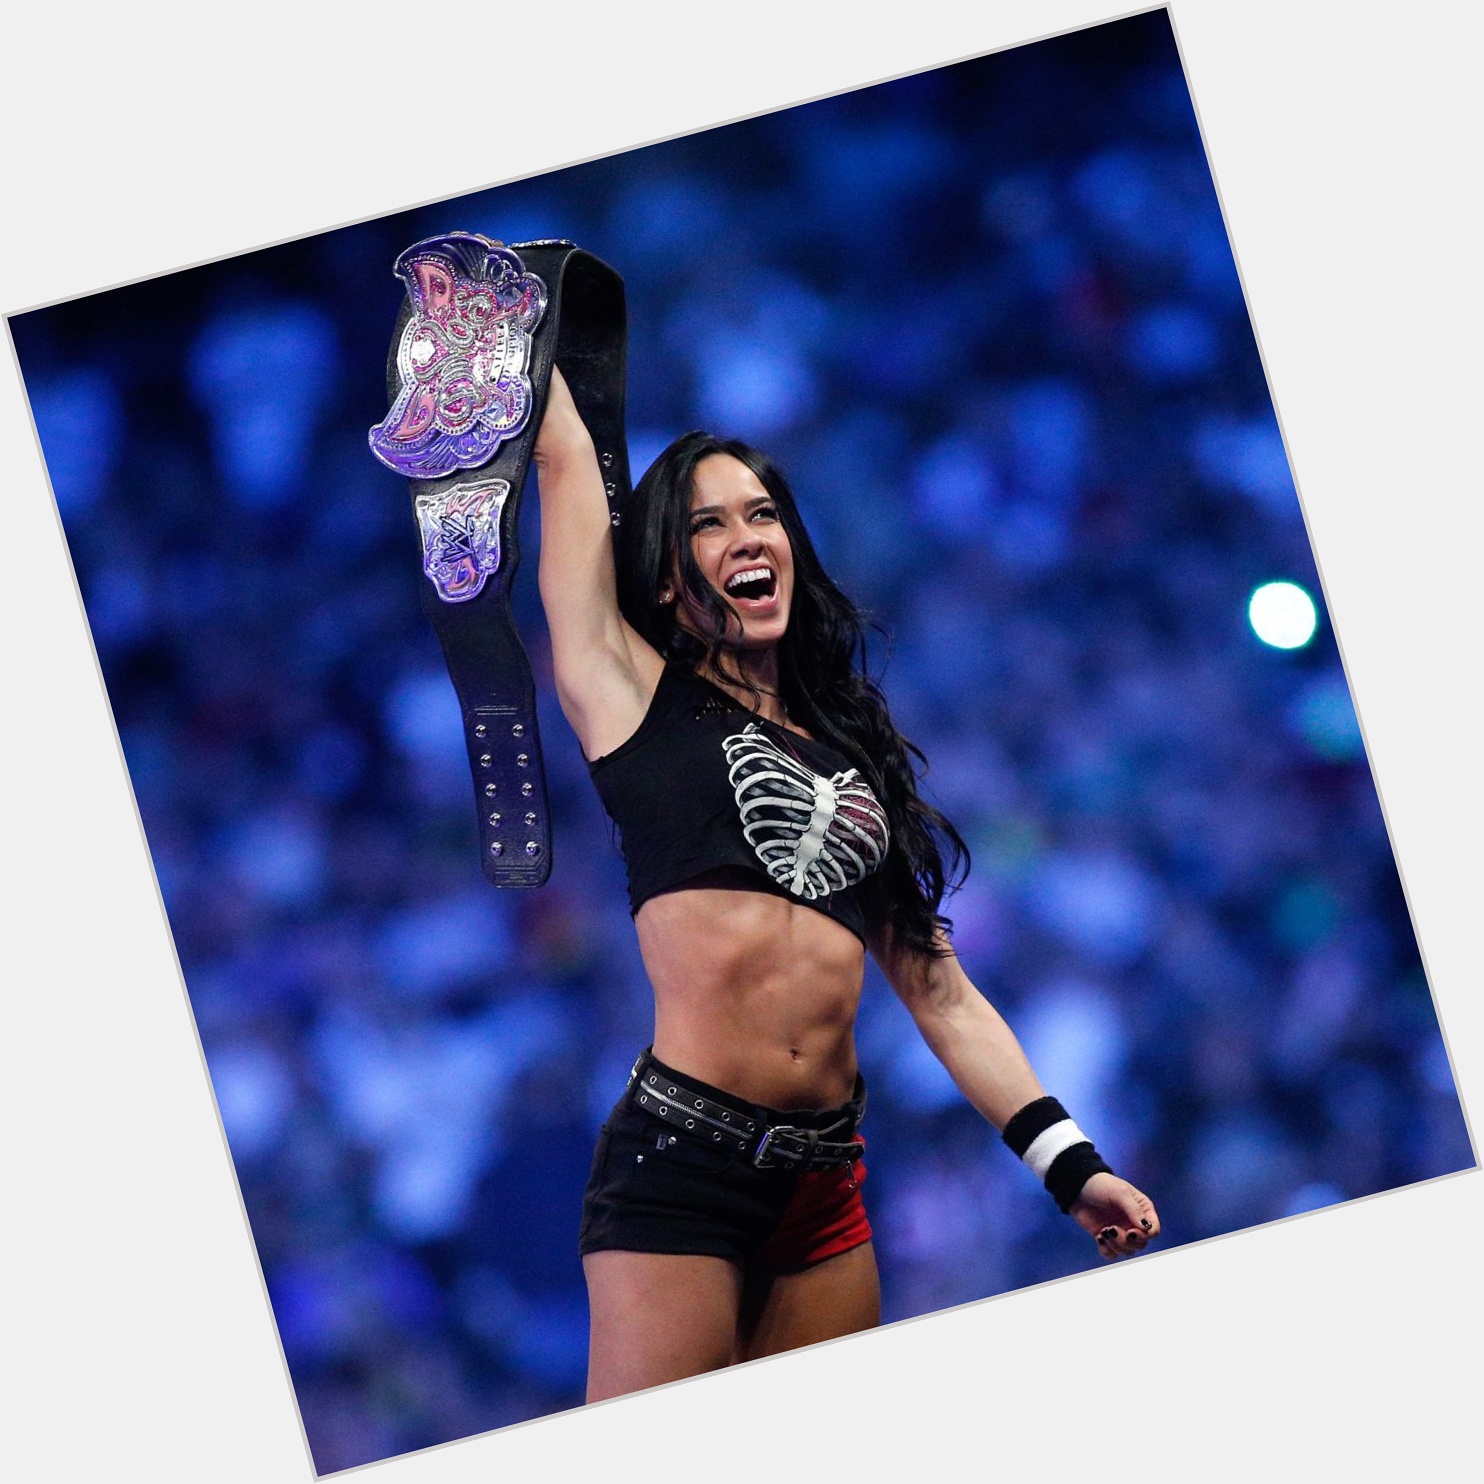 Happy birthday to the woman who made me fall in love with wrestling, AJ Lee! 